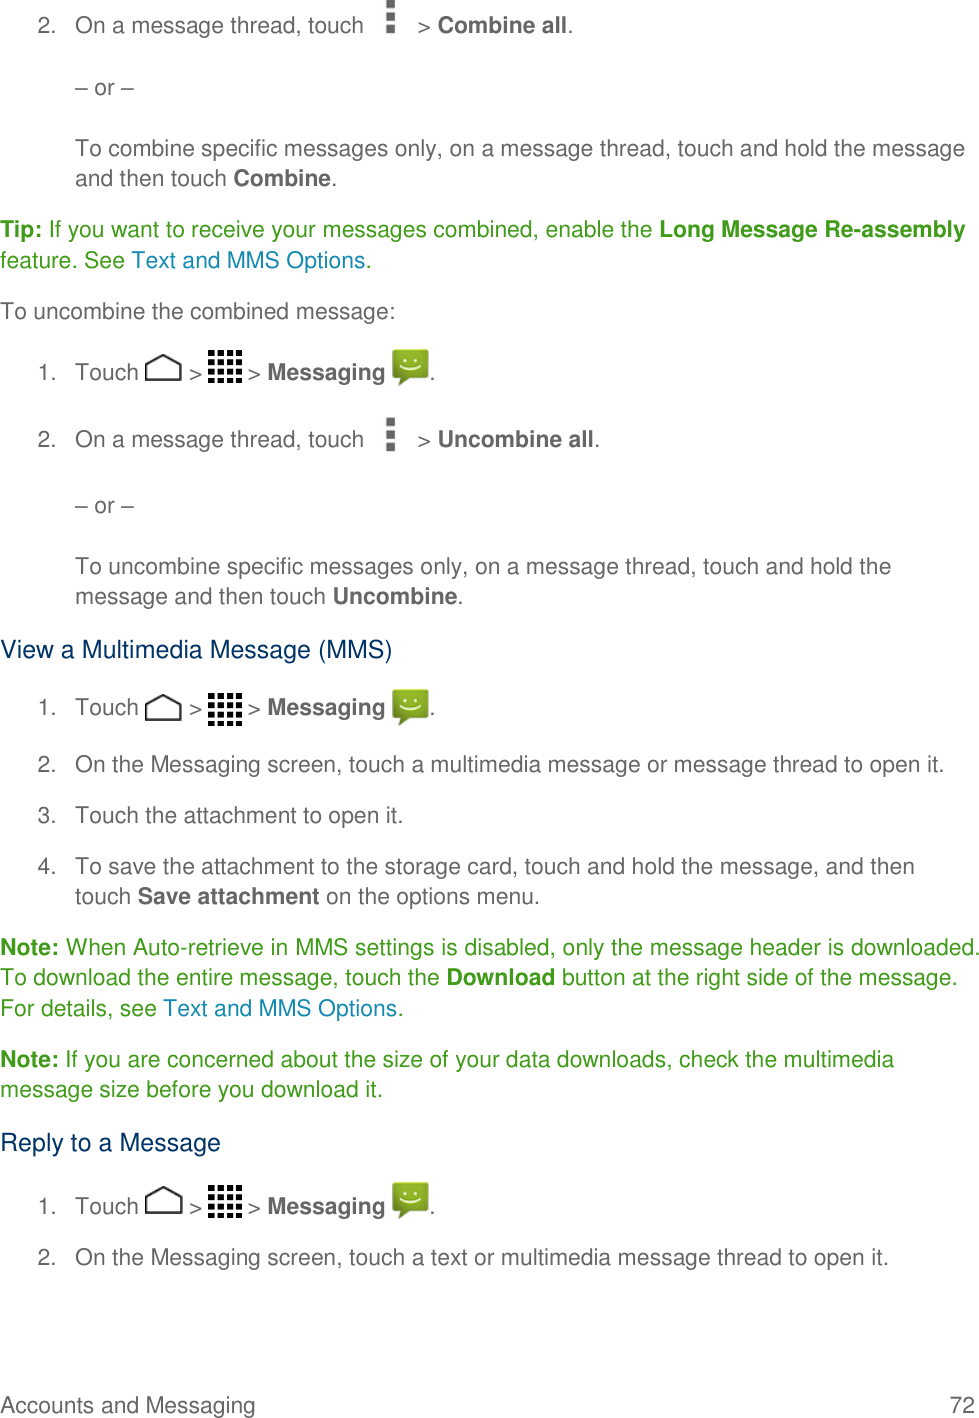 Accounts and Messaging    72 2.  On a message thread, touch   &gt; Combine all.   – or –   To combine specific messages only, on a message thread, touch and hold the message and then touch Combine. Tip: If you want to receive your messages combined, enable the Long Message Re-assembly feature. See Text and MMS Options. To uncombine the combined message: 1.  Touch   &gt;   &gt; Messaging  . 2.  On a message thread, touch   &gt; Uncombine all.   – or –   To uncombine specific messages only, on a message thread, touch and hold the message and then touch Uncombine.  View a Multimedia Message (MMS) 1.  Touch   &gt;   &gt; Messaging  . 2.  On the Messaging screen, touch a multimedia message or message thread to open it. 3.  Touch the attachment to open it. 4.  To save the attachment to the storage card, touch and hold the message, and then touch Save attachment on the options menu. Note: When Auto-retrieve in MMS settings is disabled, only the message header is downloaded. To download the entire message, touch the Download button at the right side of the message. For details, see Text and MMS Options. Note: If you are concerned about the size of your data downloads, check the multimedia message size before you download it. Reply to a Message 1.  Touch   &gt;   &gt; Messaging  . 2.  On the Messaging screen, touch a text or multimedia message thread to open it. 